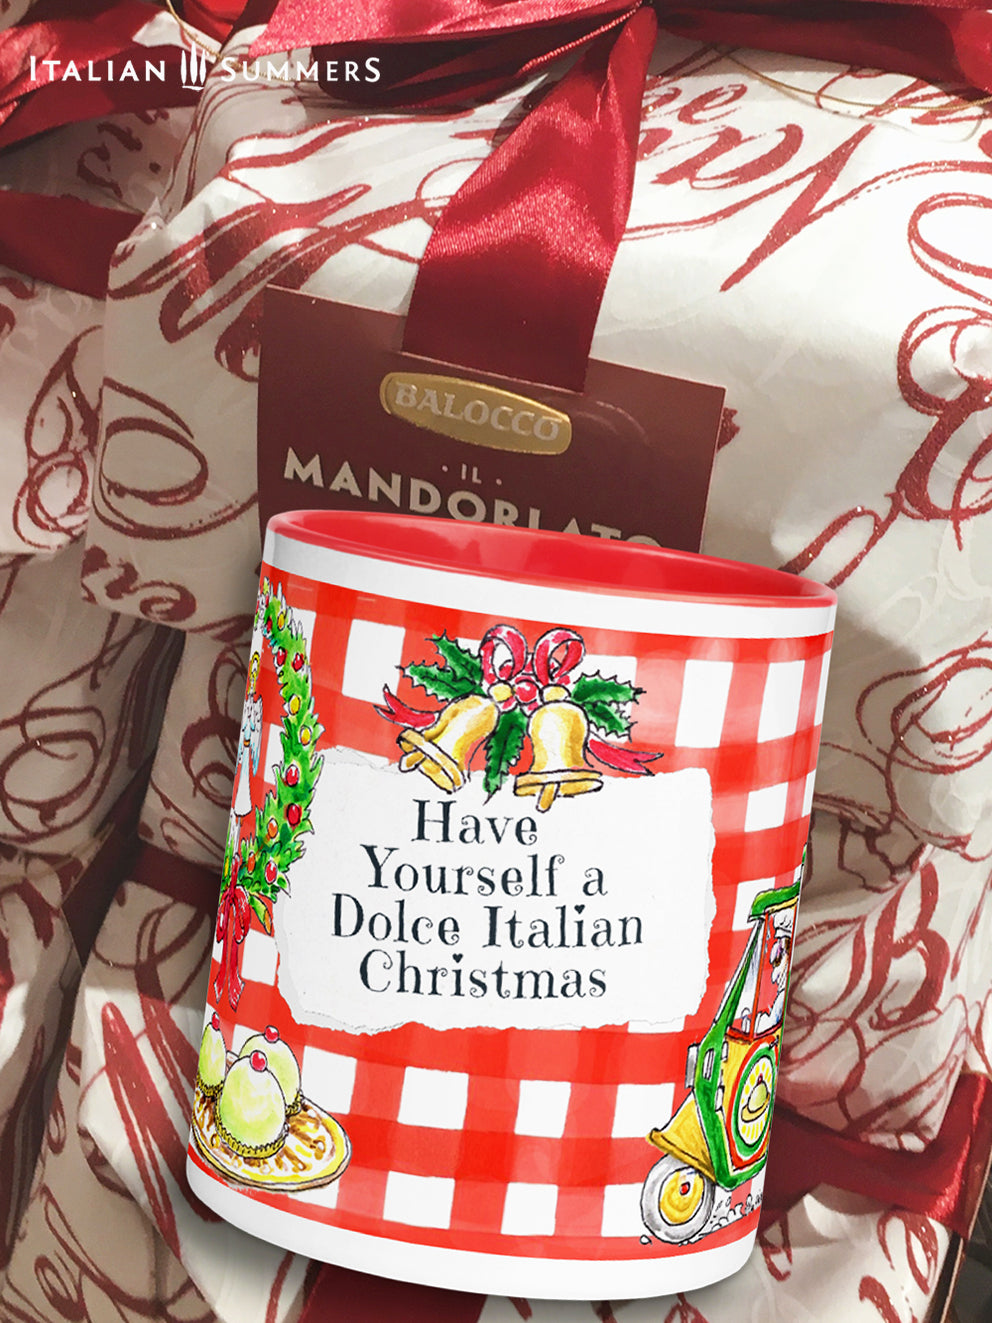 Italy Chirstmas mug Pane e Dolci with a sketch of the local Italian baker, driving his funny car with the text PANE & DOLCE, and on the top he has the biggest panettone. Ther are italian dolce on the mug and the text "have yourself a Dolce Italian Christmas" made by Italian Summers